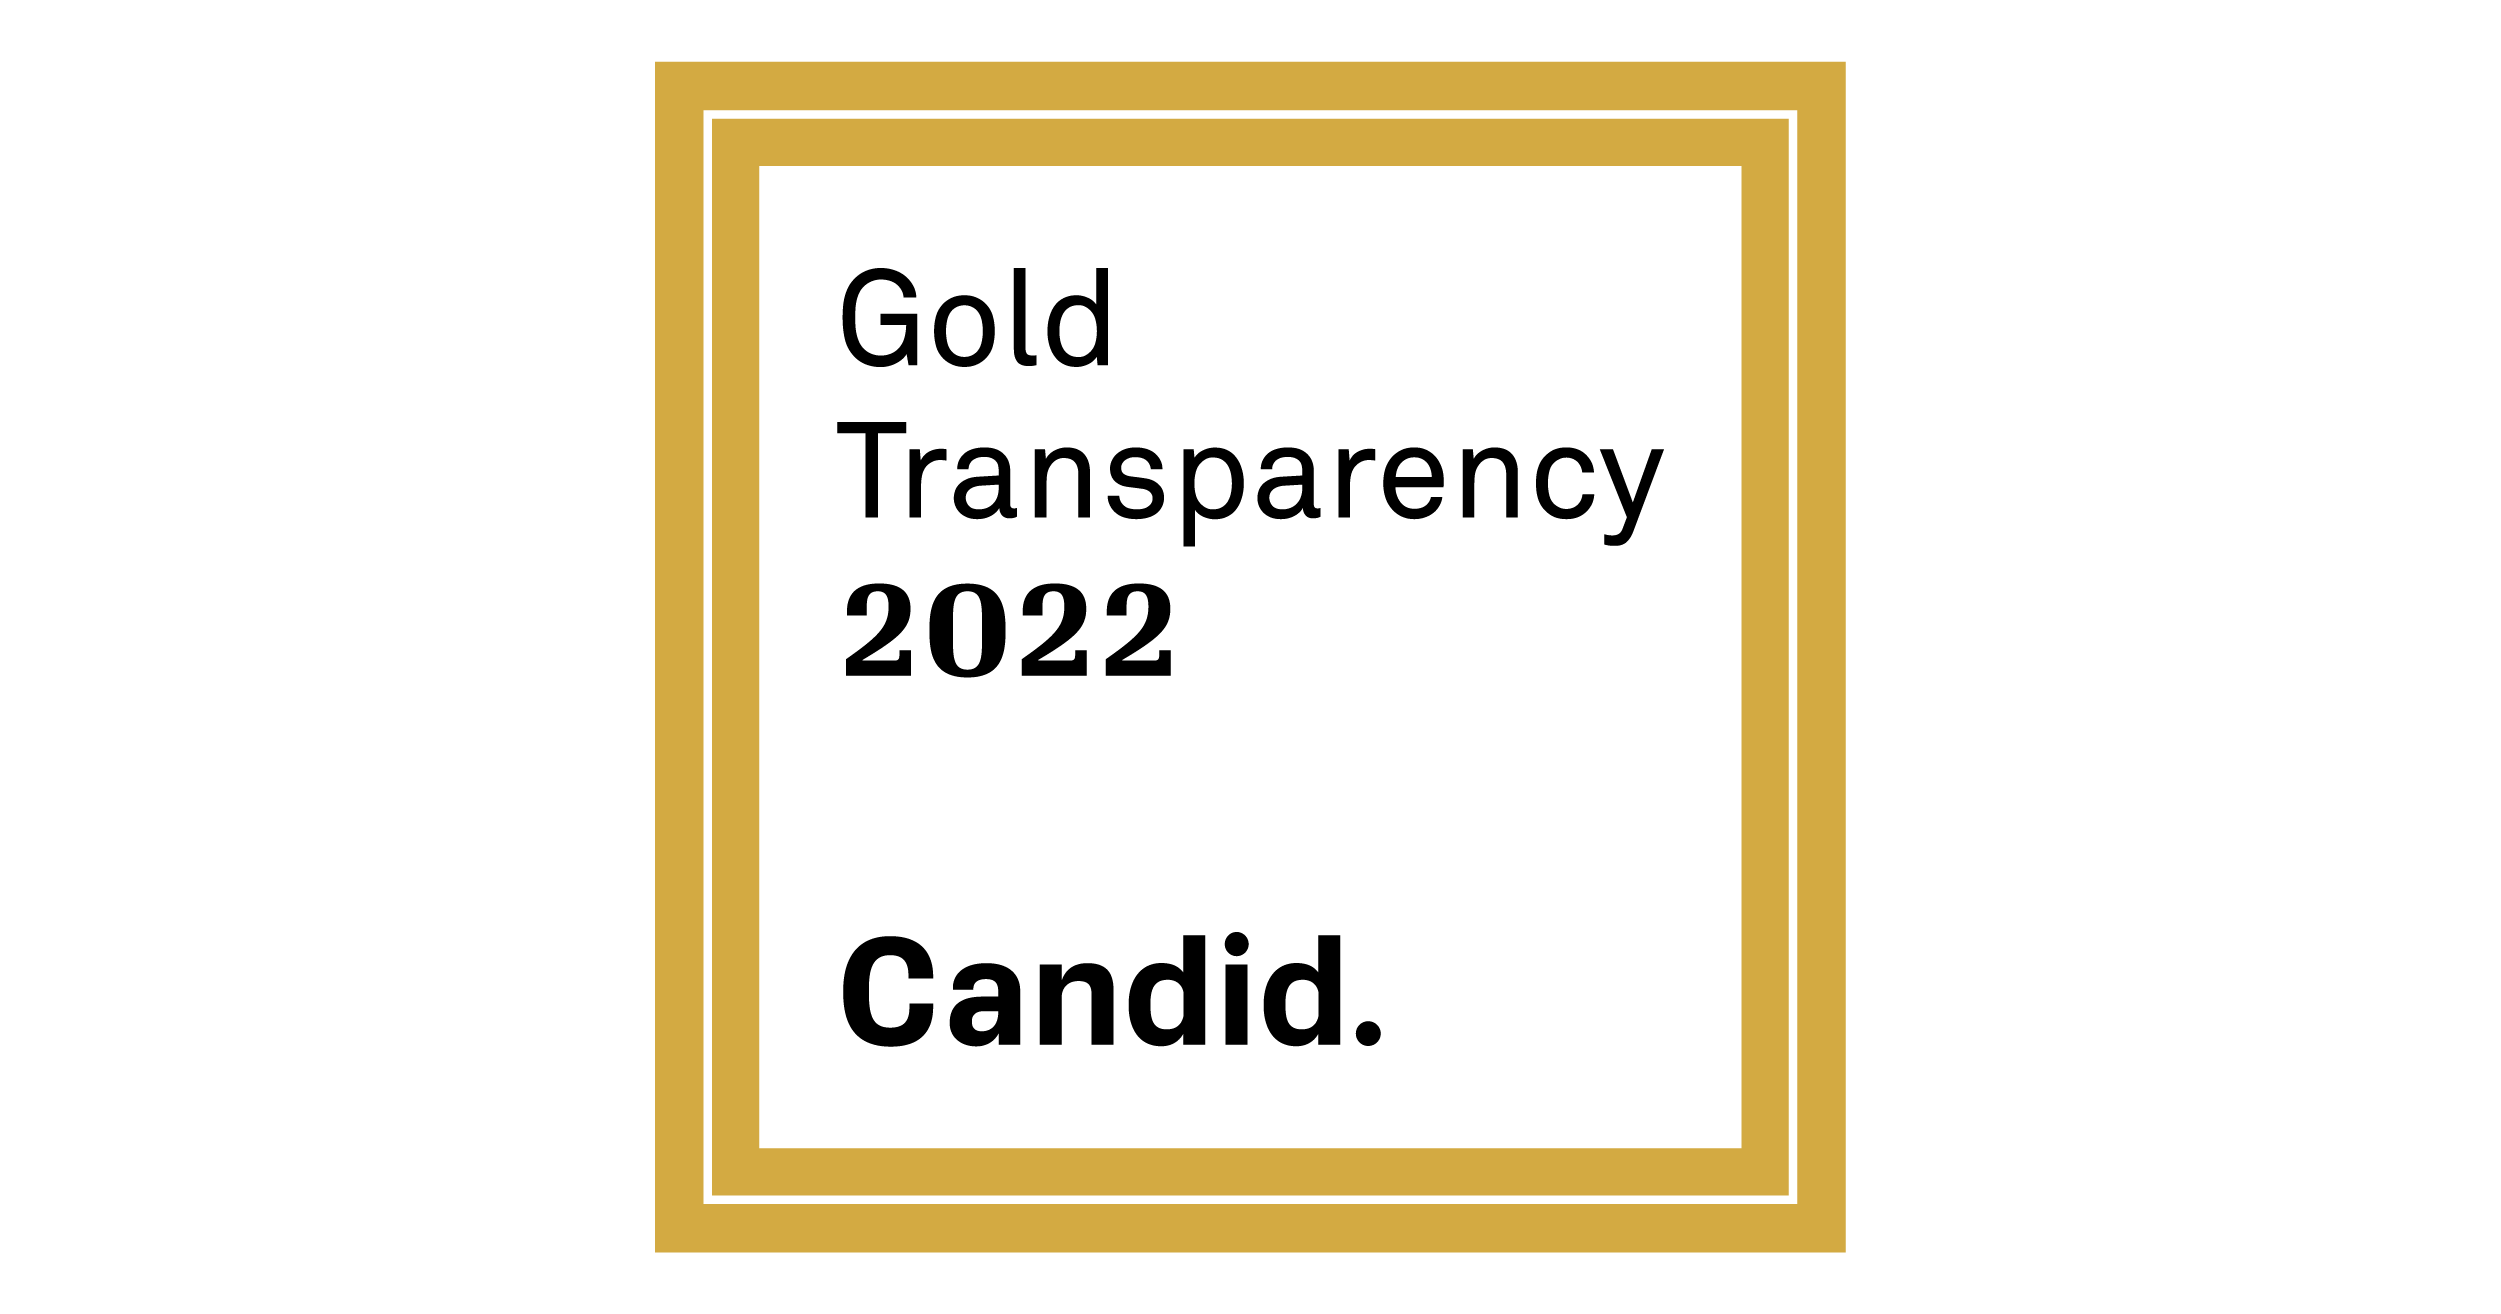 Gold Transparenct 2022 Candid.